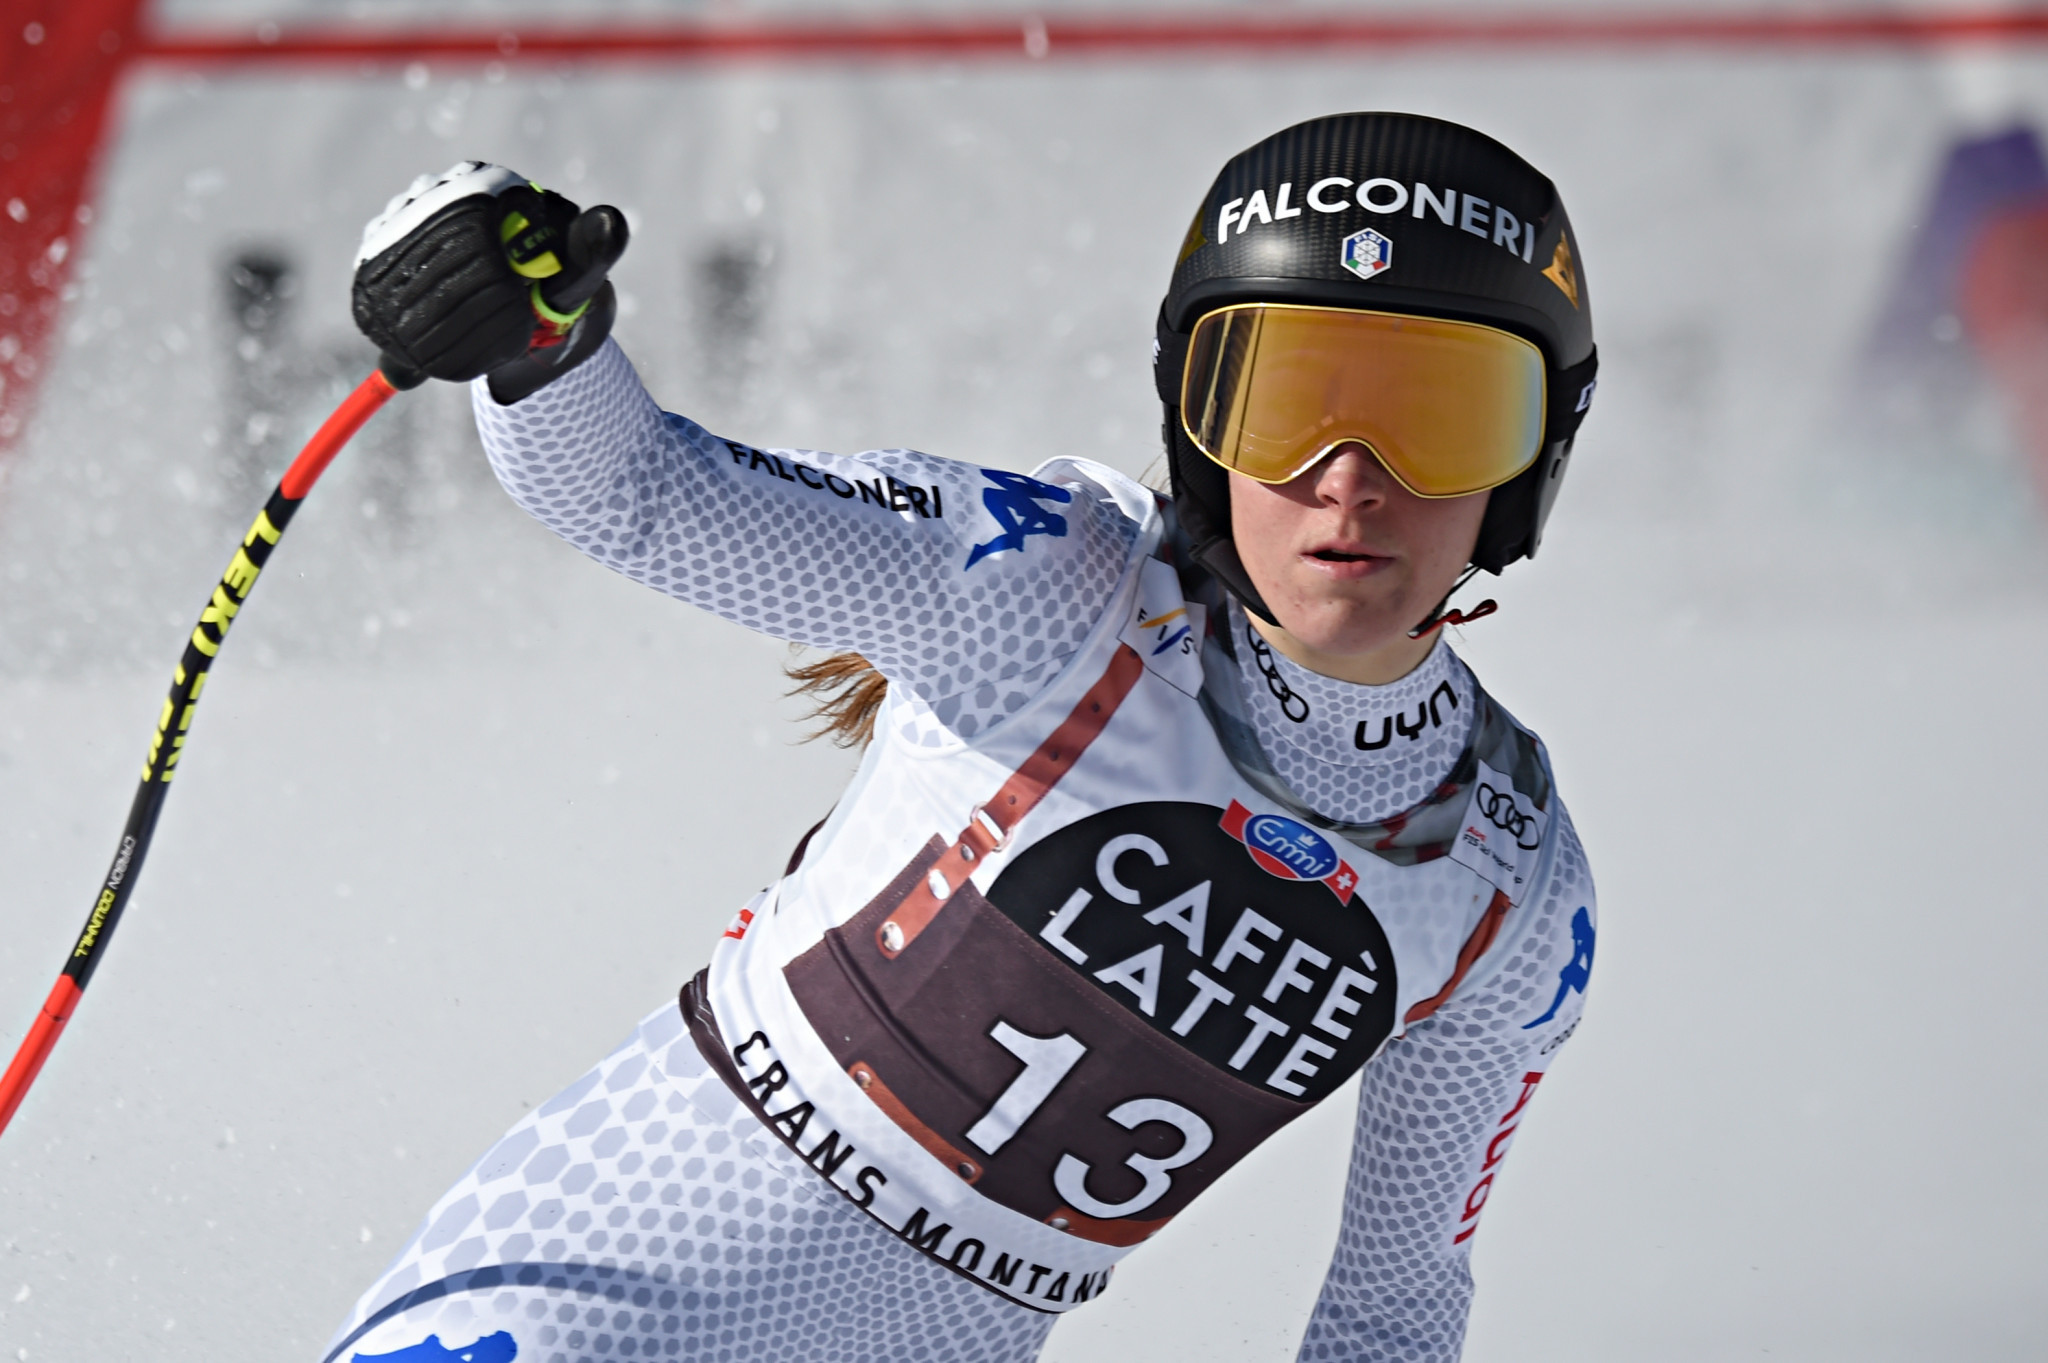 Goggia wins FIS Alpine Skiing World Cup downhill in Crans-Montana as timekeeper apologises for problems